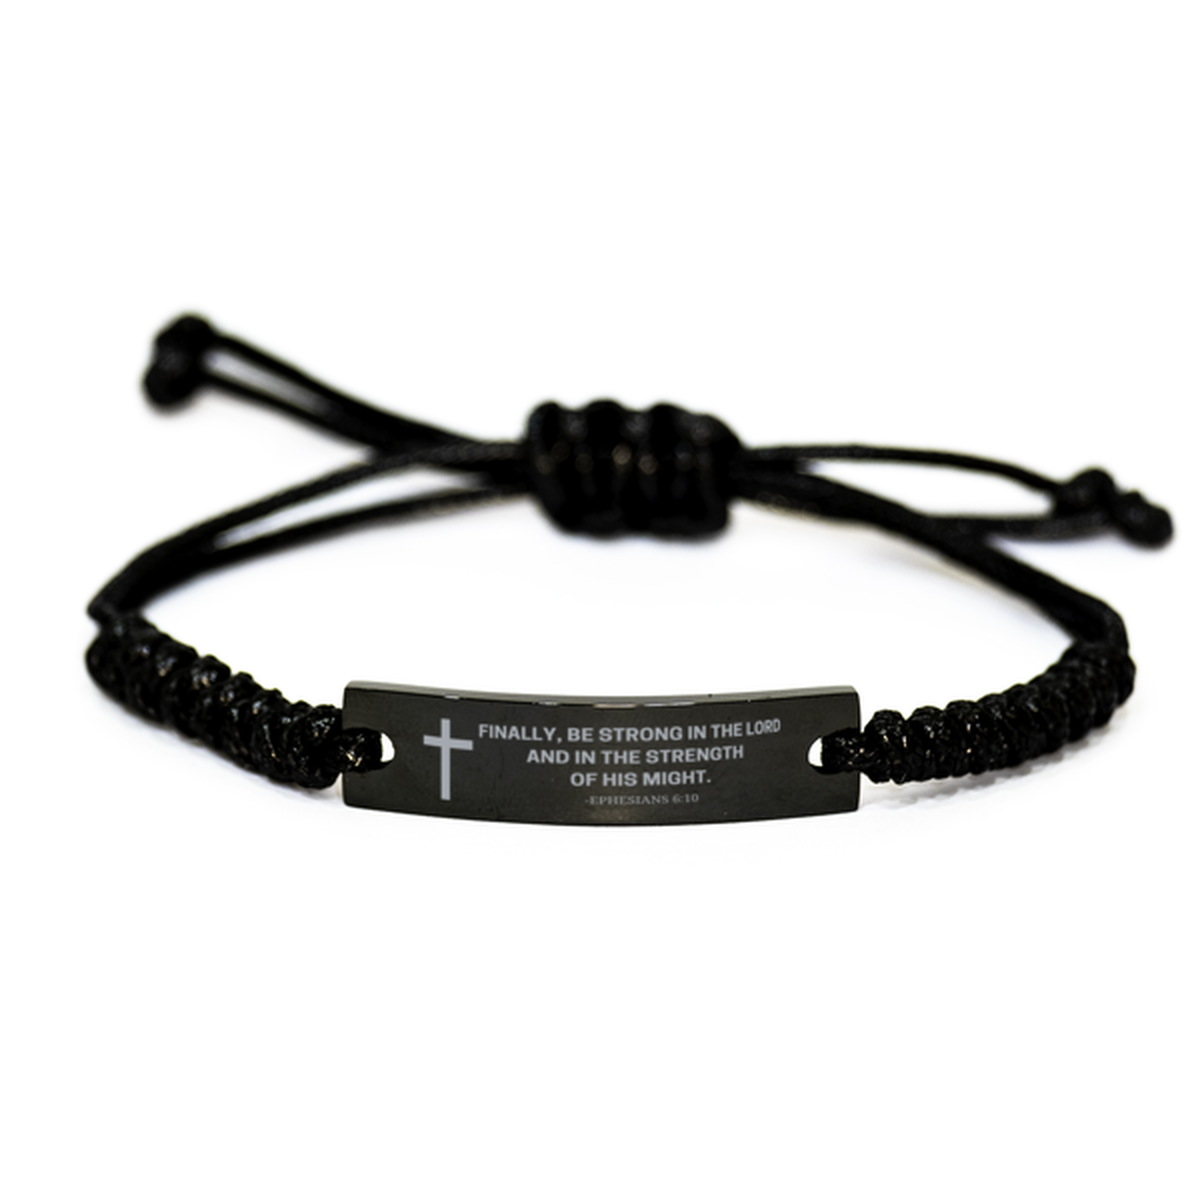 Baptism Gifts For Teenage Boys Girls, Christian Bible Verse Black Rope Bracelet, Finally, be strong in the Lord Catholic Confirmation Gifts for Son, Godson, Grandson, Nephew